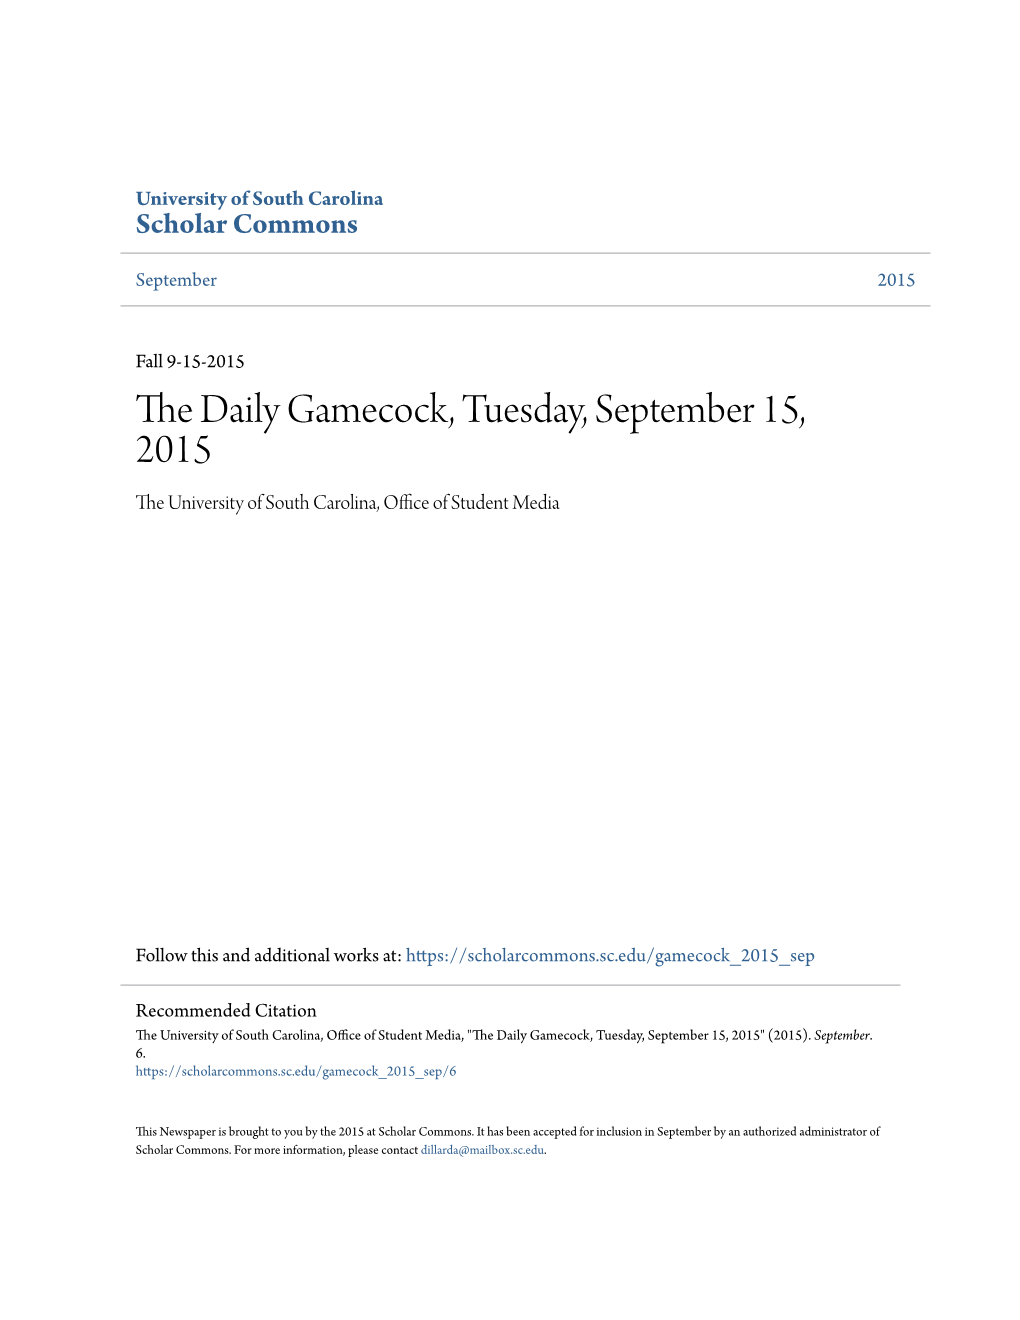 The Daily Gamecock, Tuesday, September 15, 2015